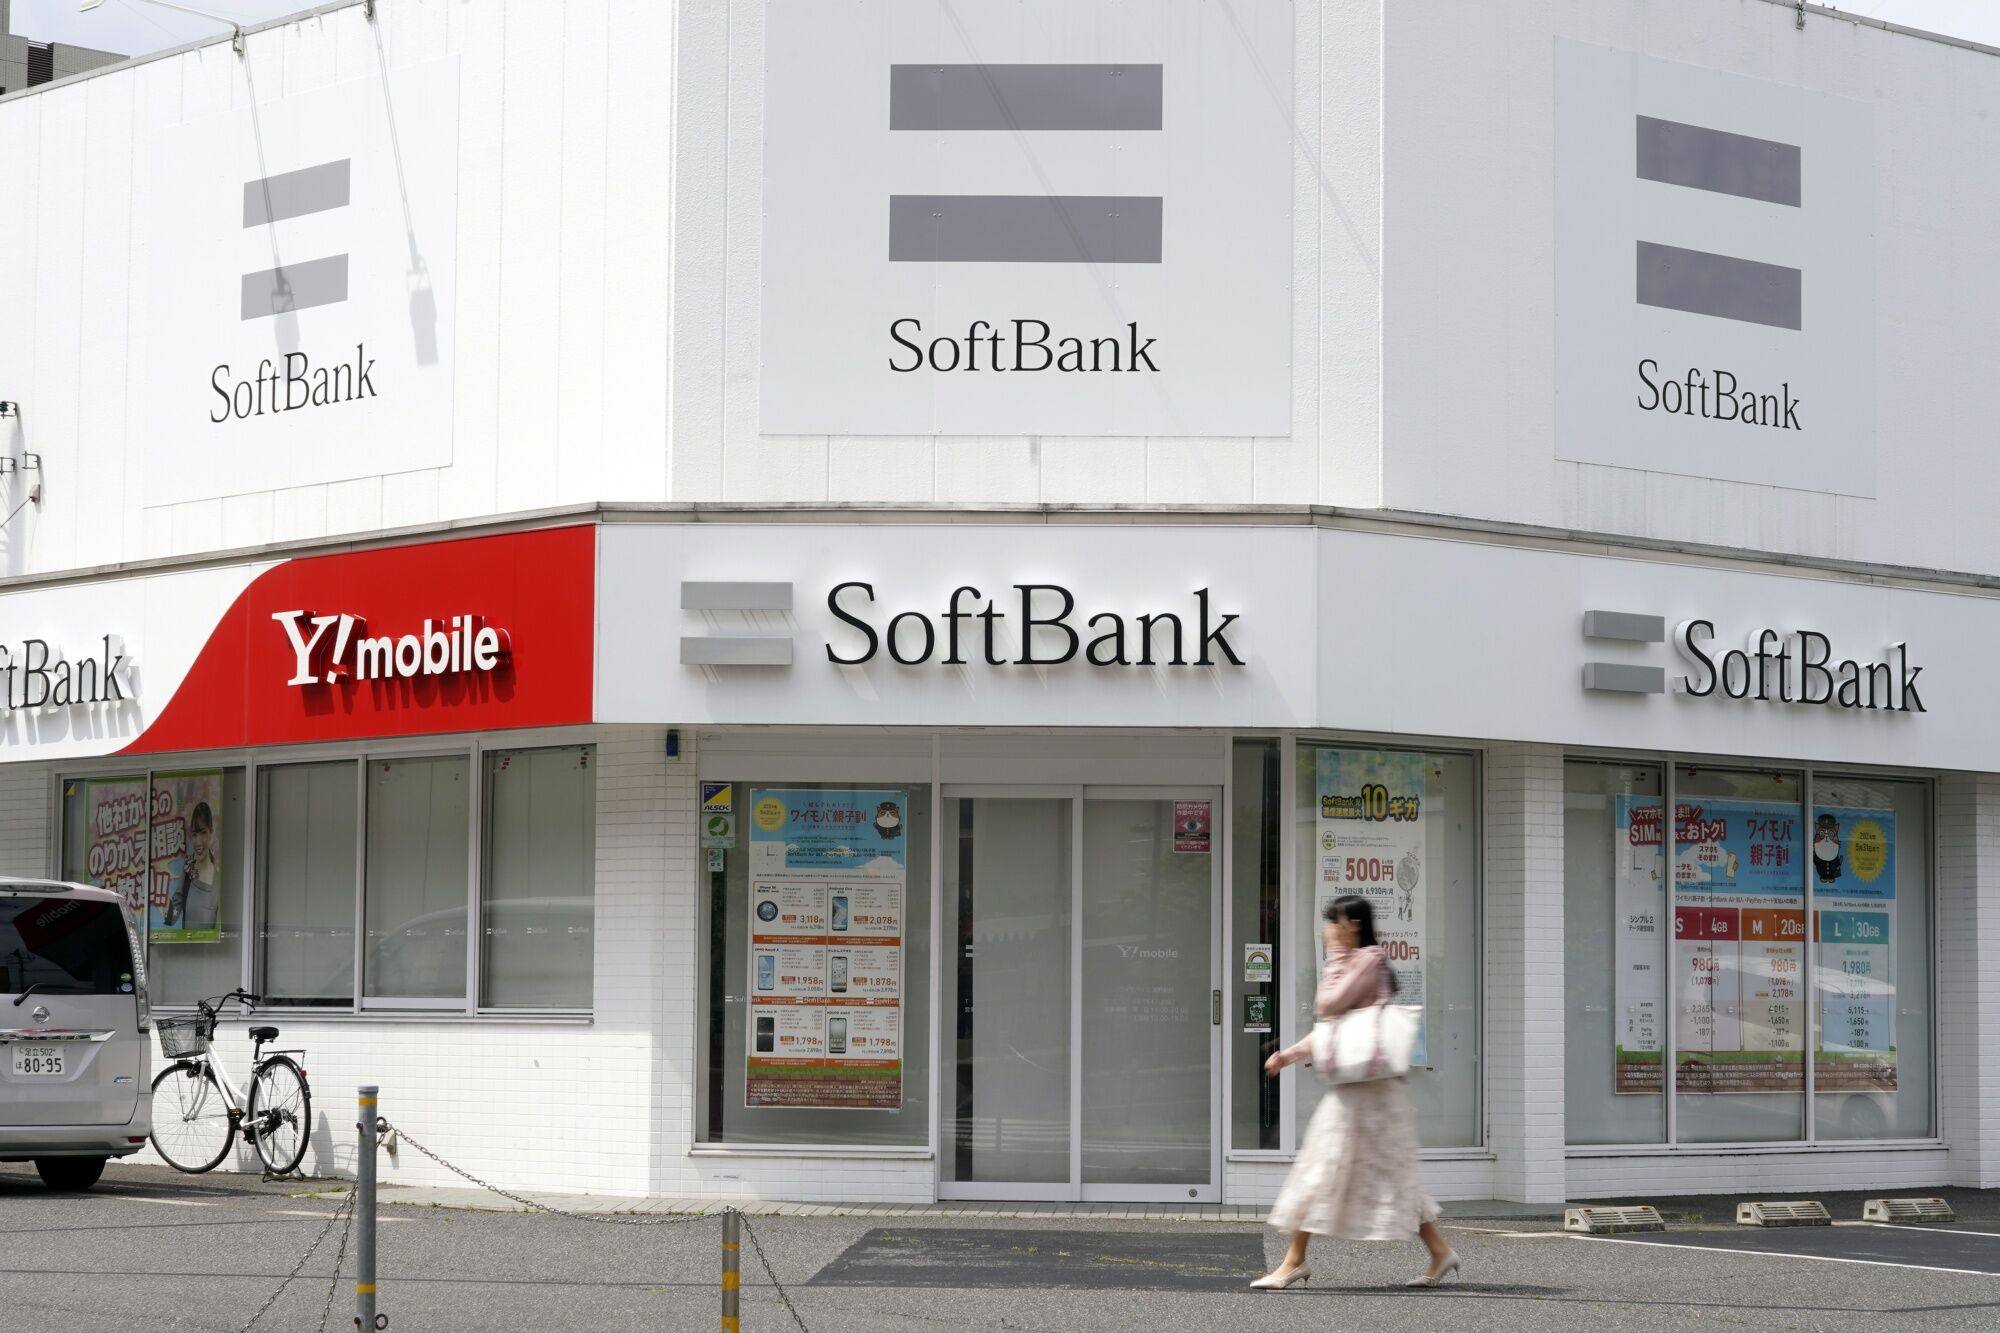 Signage for SoftBank and the company’s Y!mobile brand seen at a store in Tokyo. Photo: Bloomberg